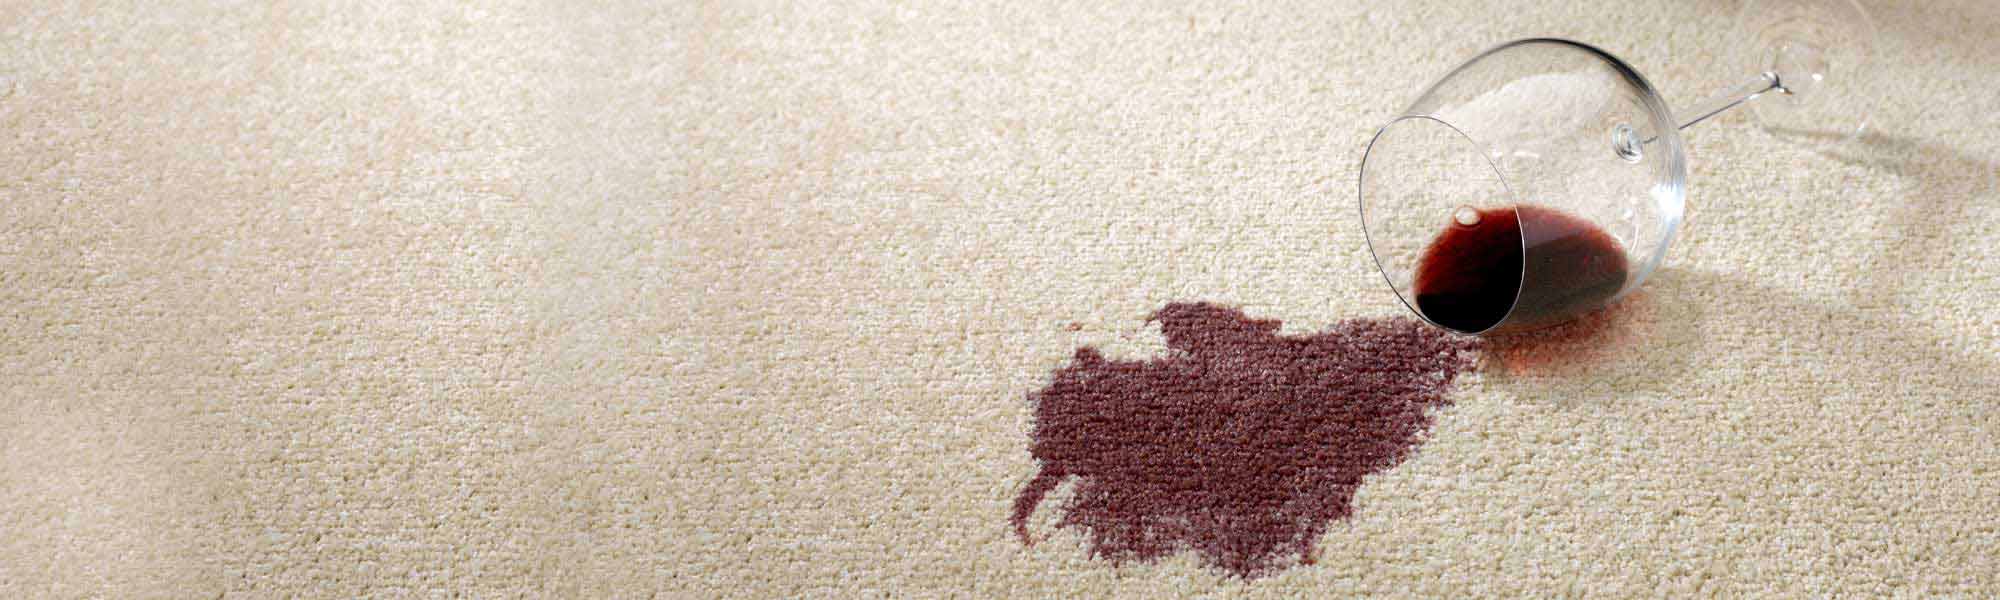 Professional Stain Removal Service by Chem-Dry of CSRA in North Augusta & Aiken